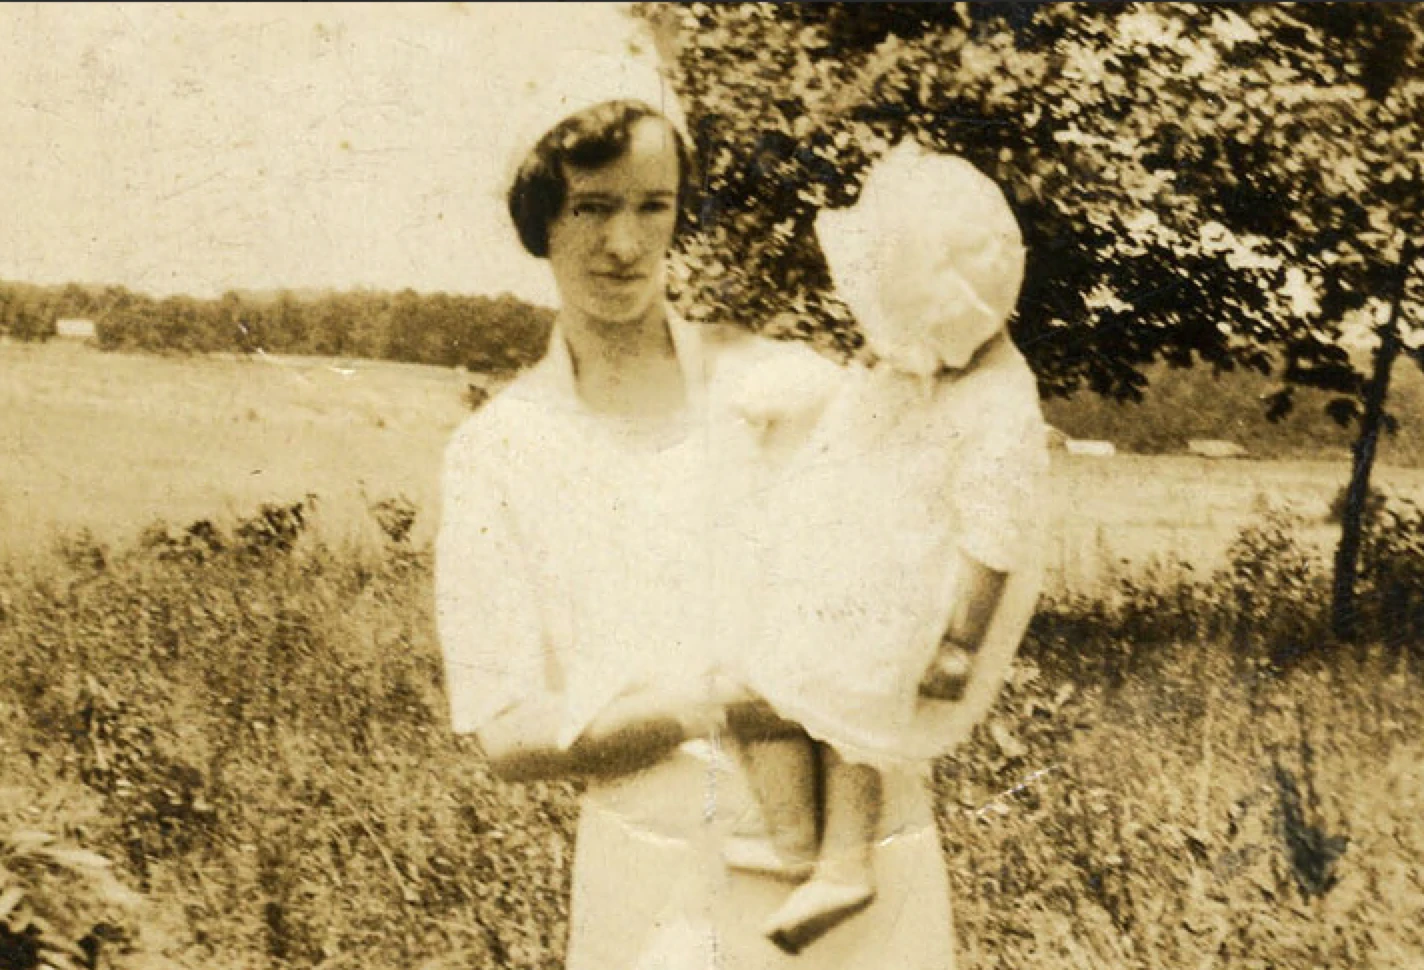 Rebecca holds baby Charles in this photo circa 1933.